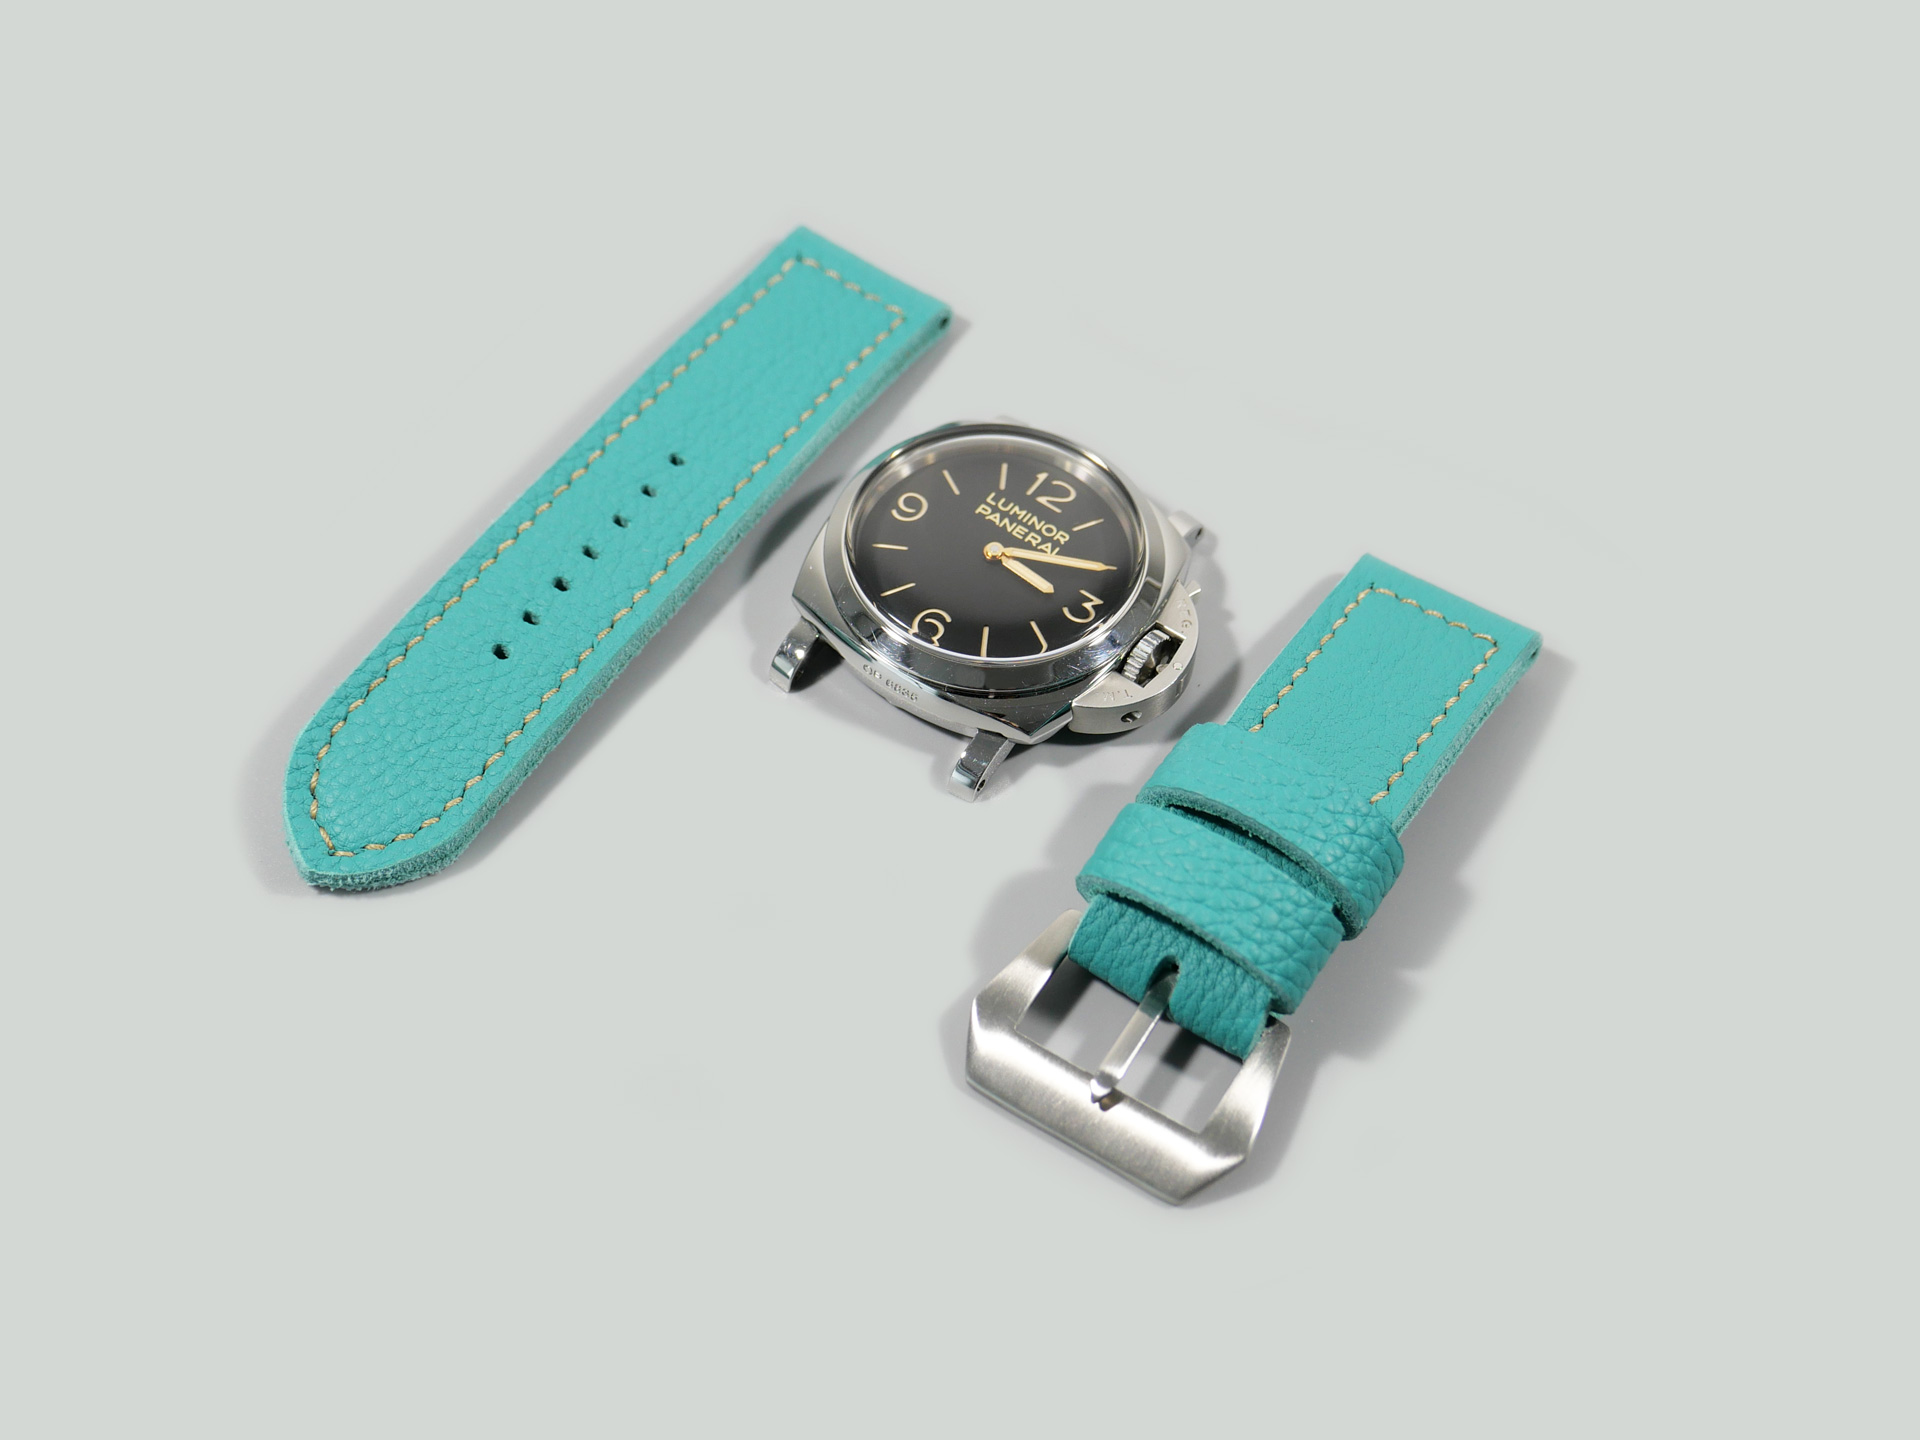 Pacific Blue Ostrich Leather strap for Panerai style timepieces